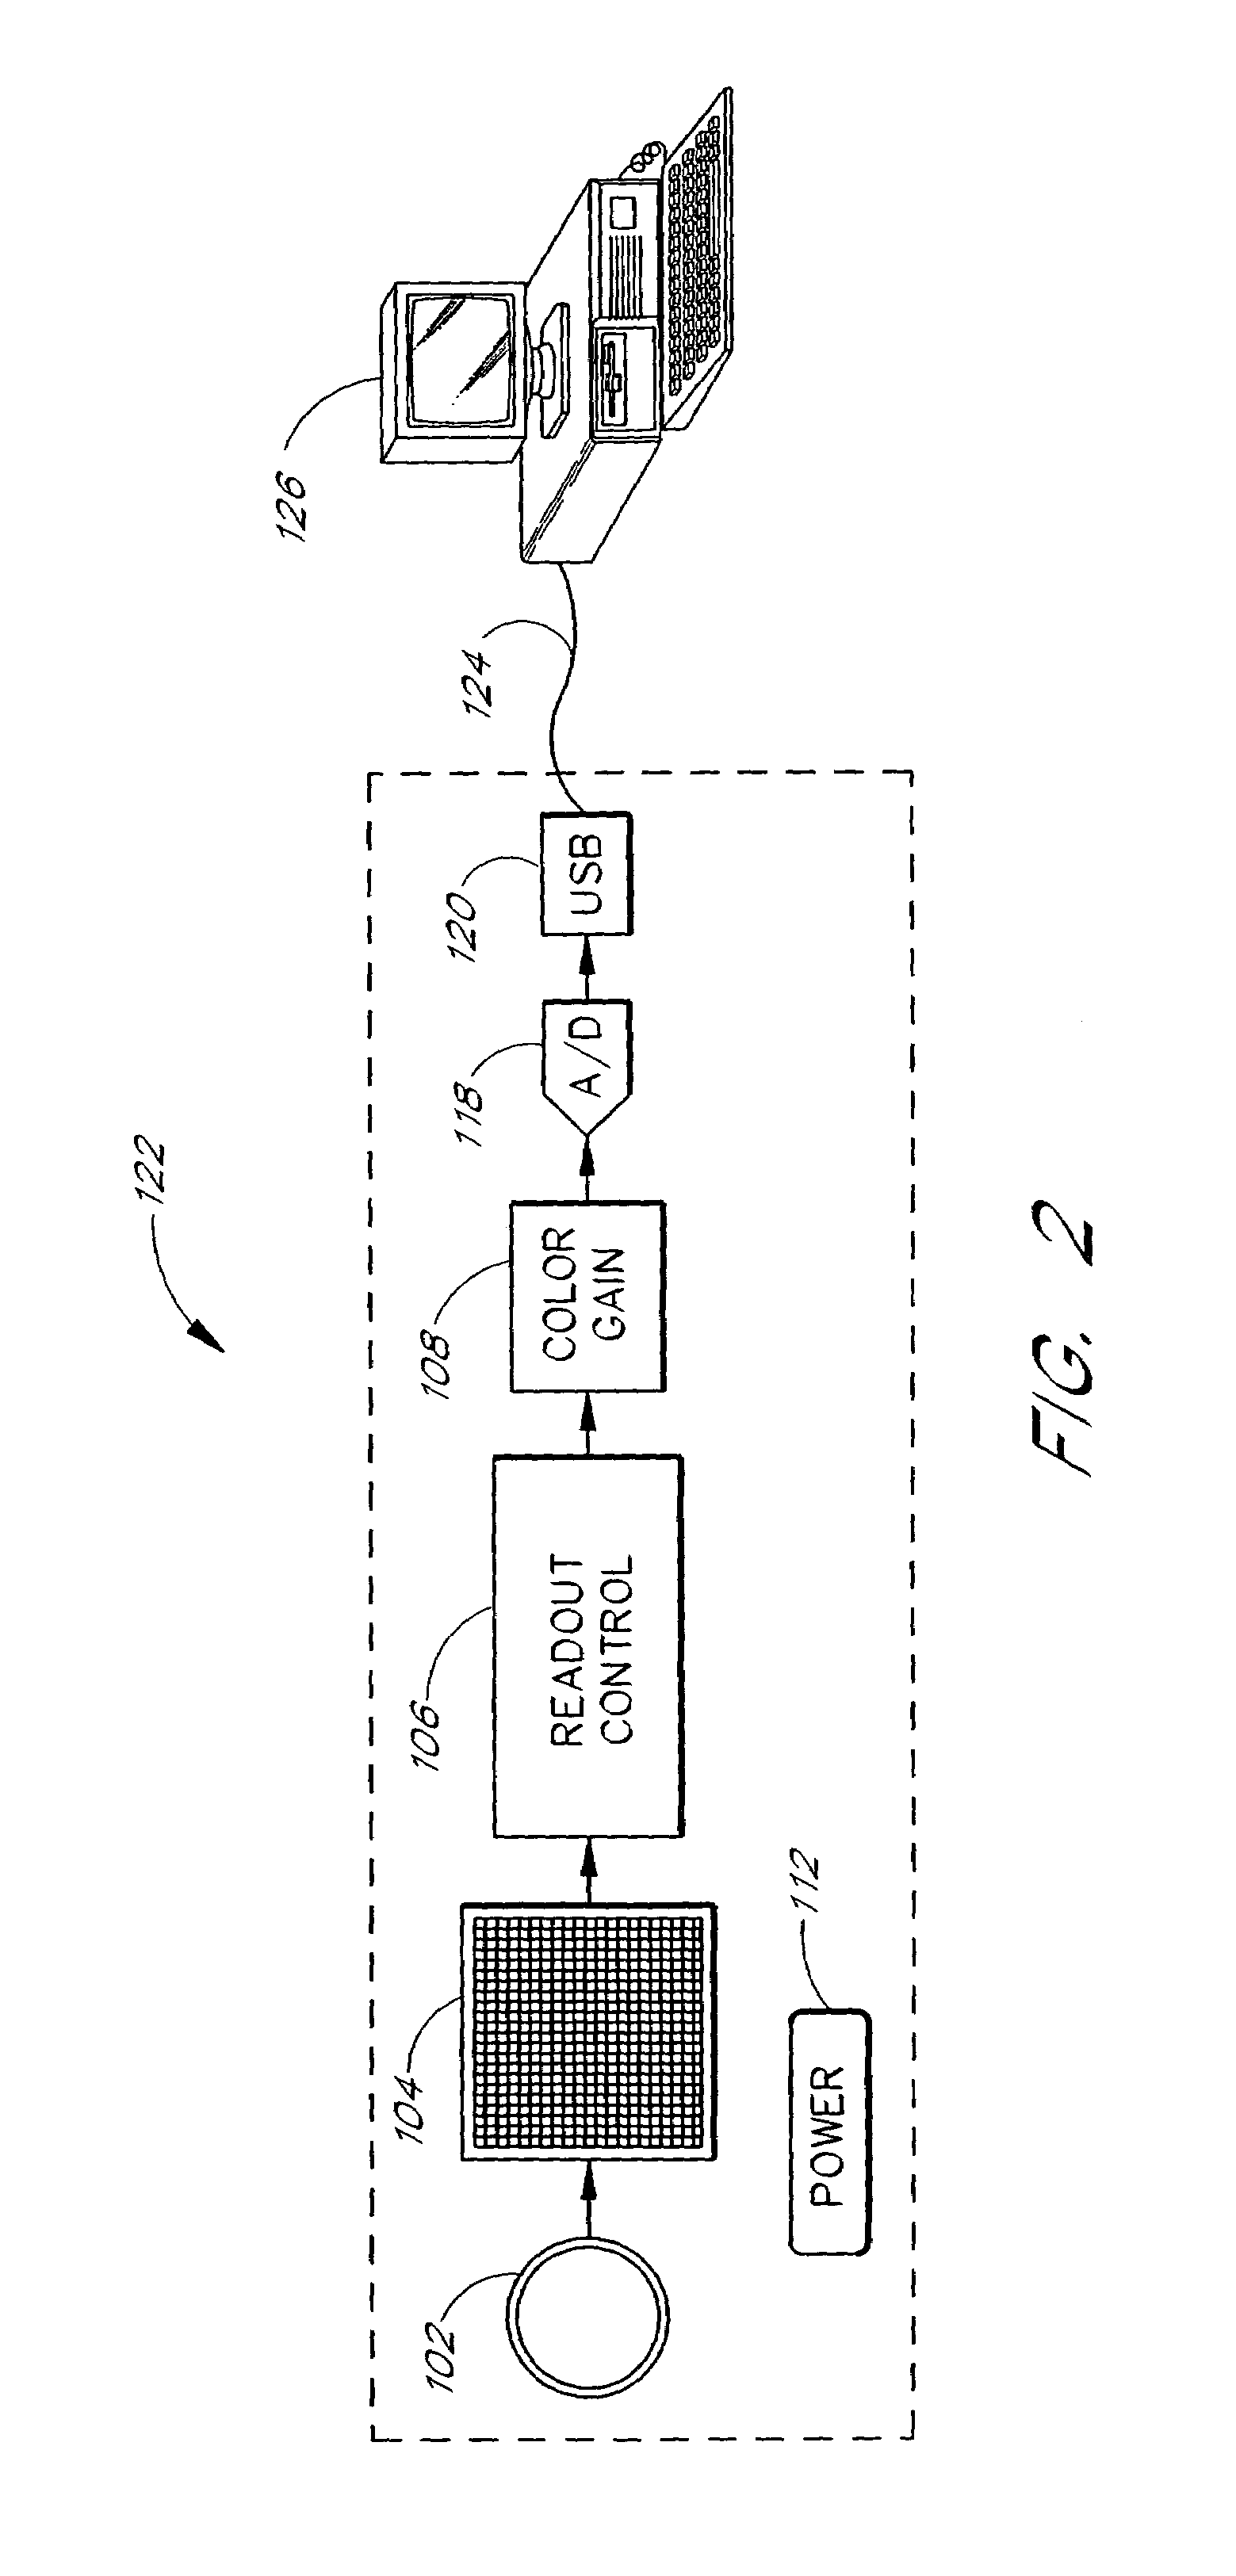 Methods and systems for detecting defective imaging pixels and pixel values